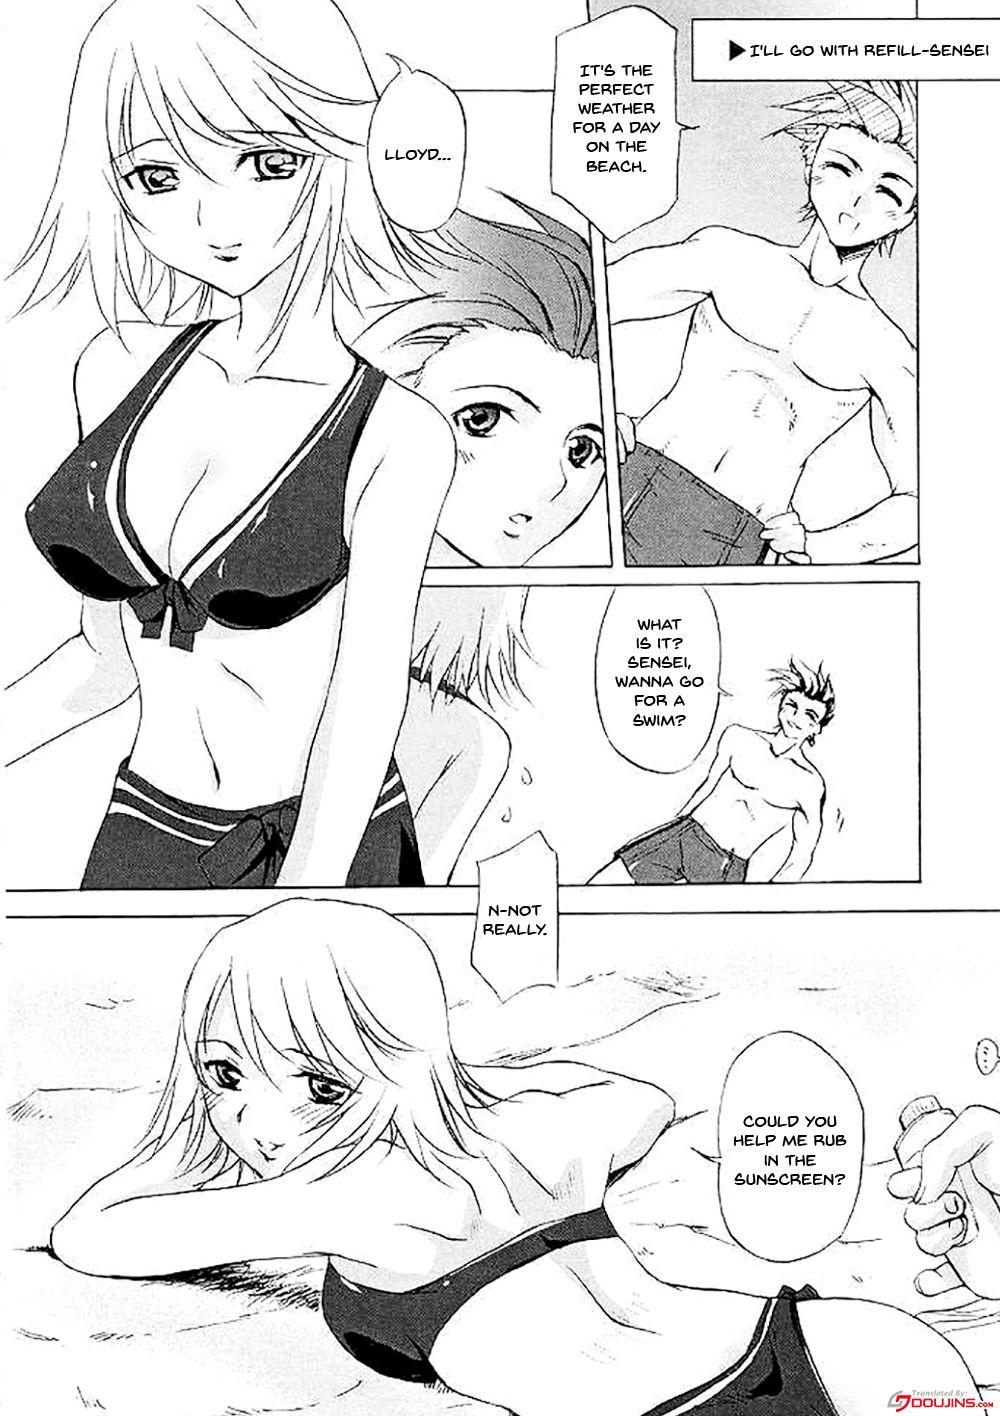 Petite Girl Porn Tales of Seaside - Tales of symphonia Comedor - Page 3